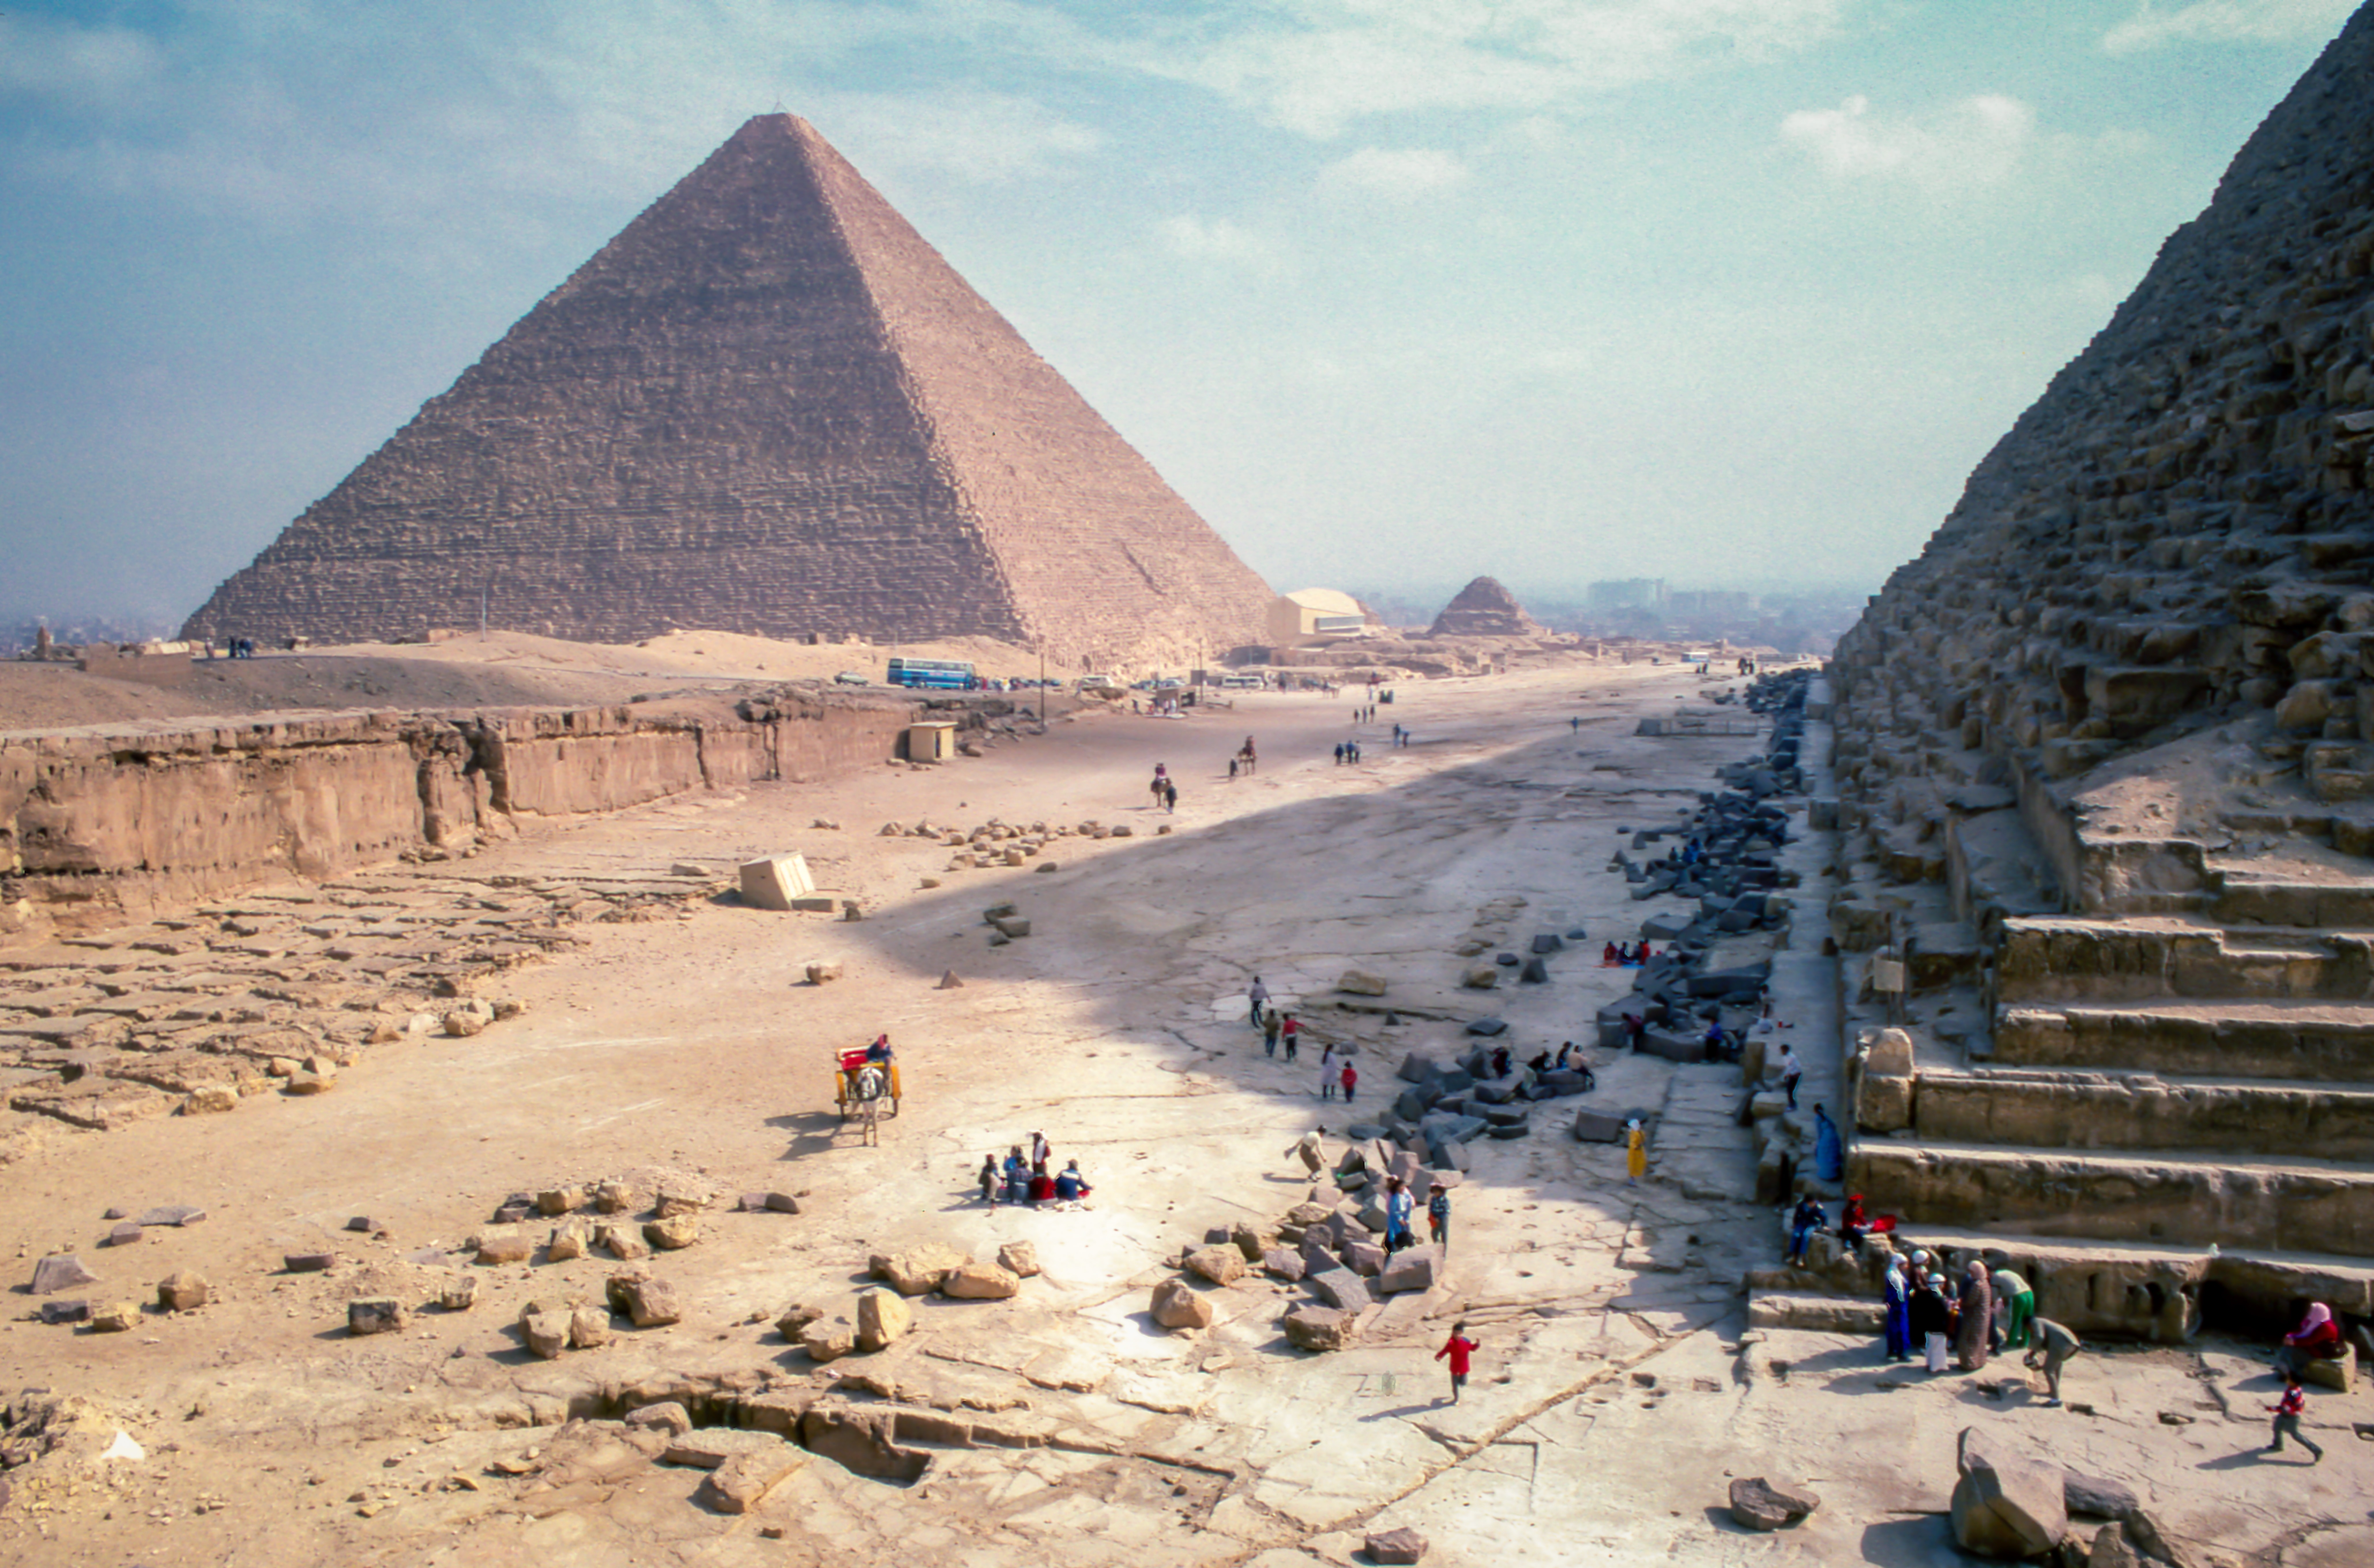 The picture shows one of the pyramids in Giza with workers in the background.